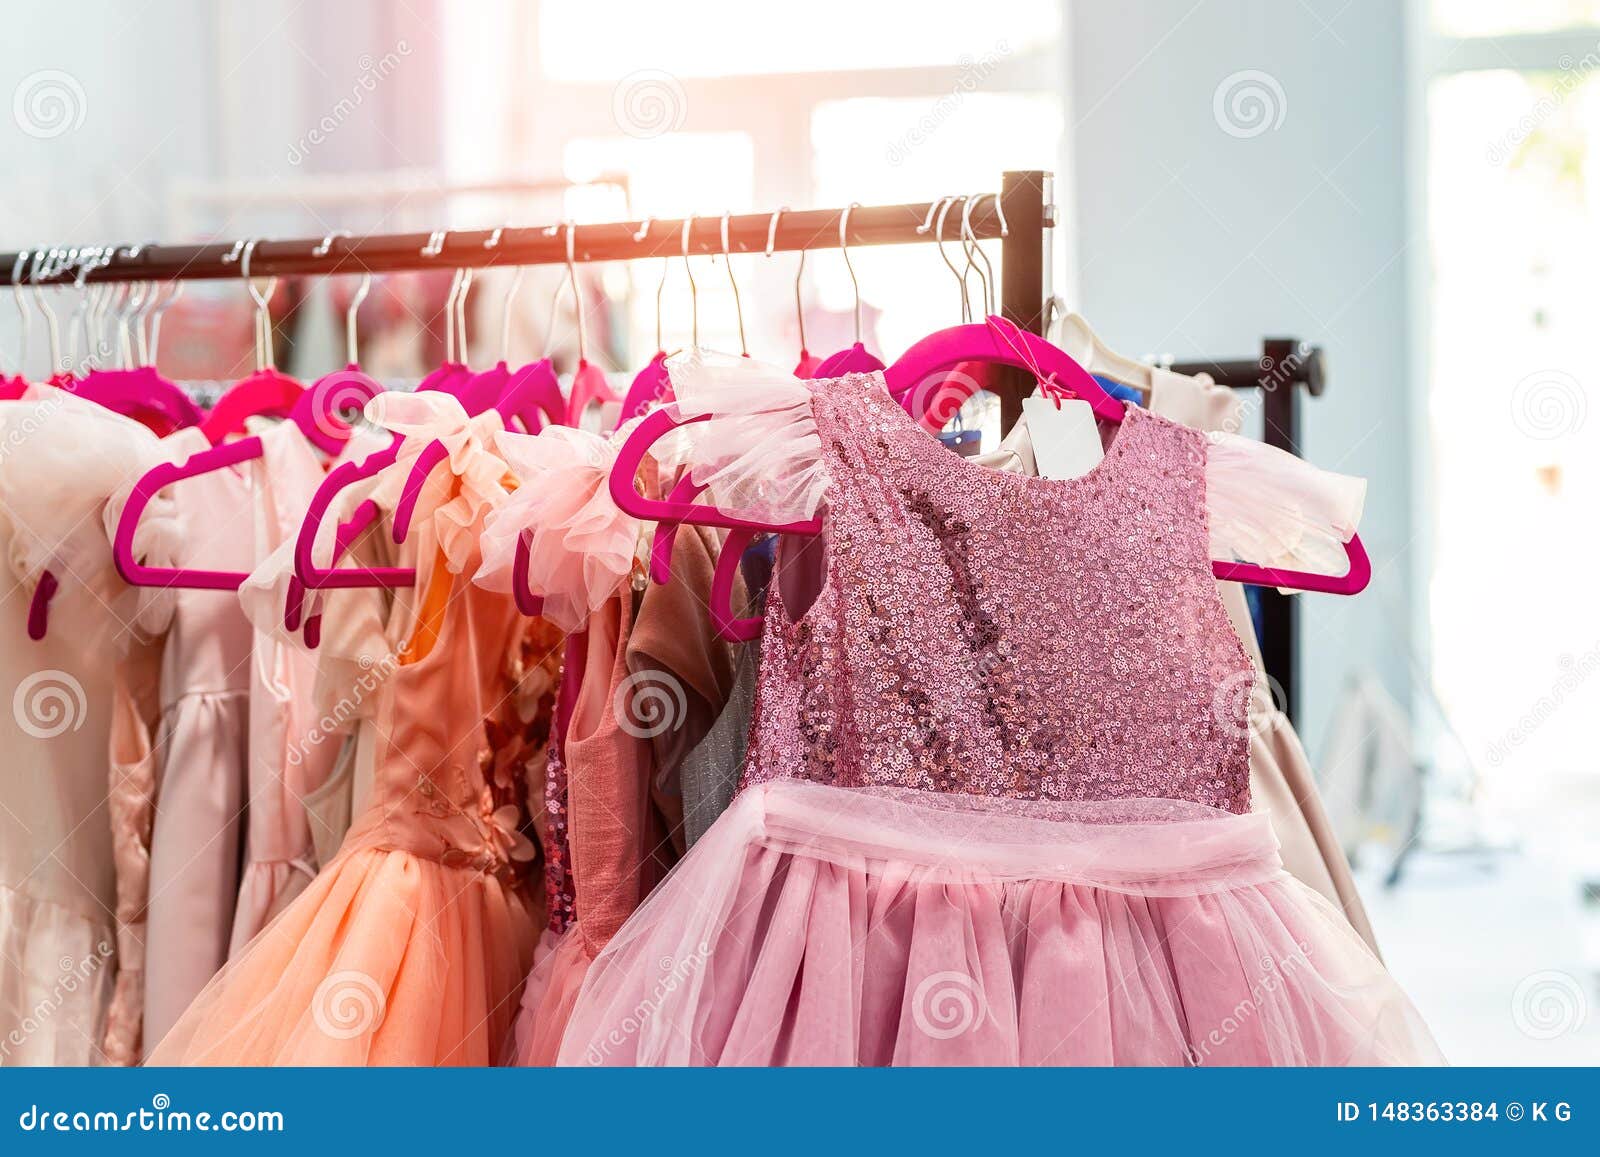 Rack with Many Beautiful Holiday Dresses for Girls on Hangers at ...